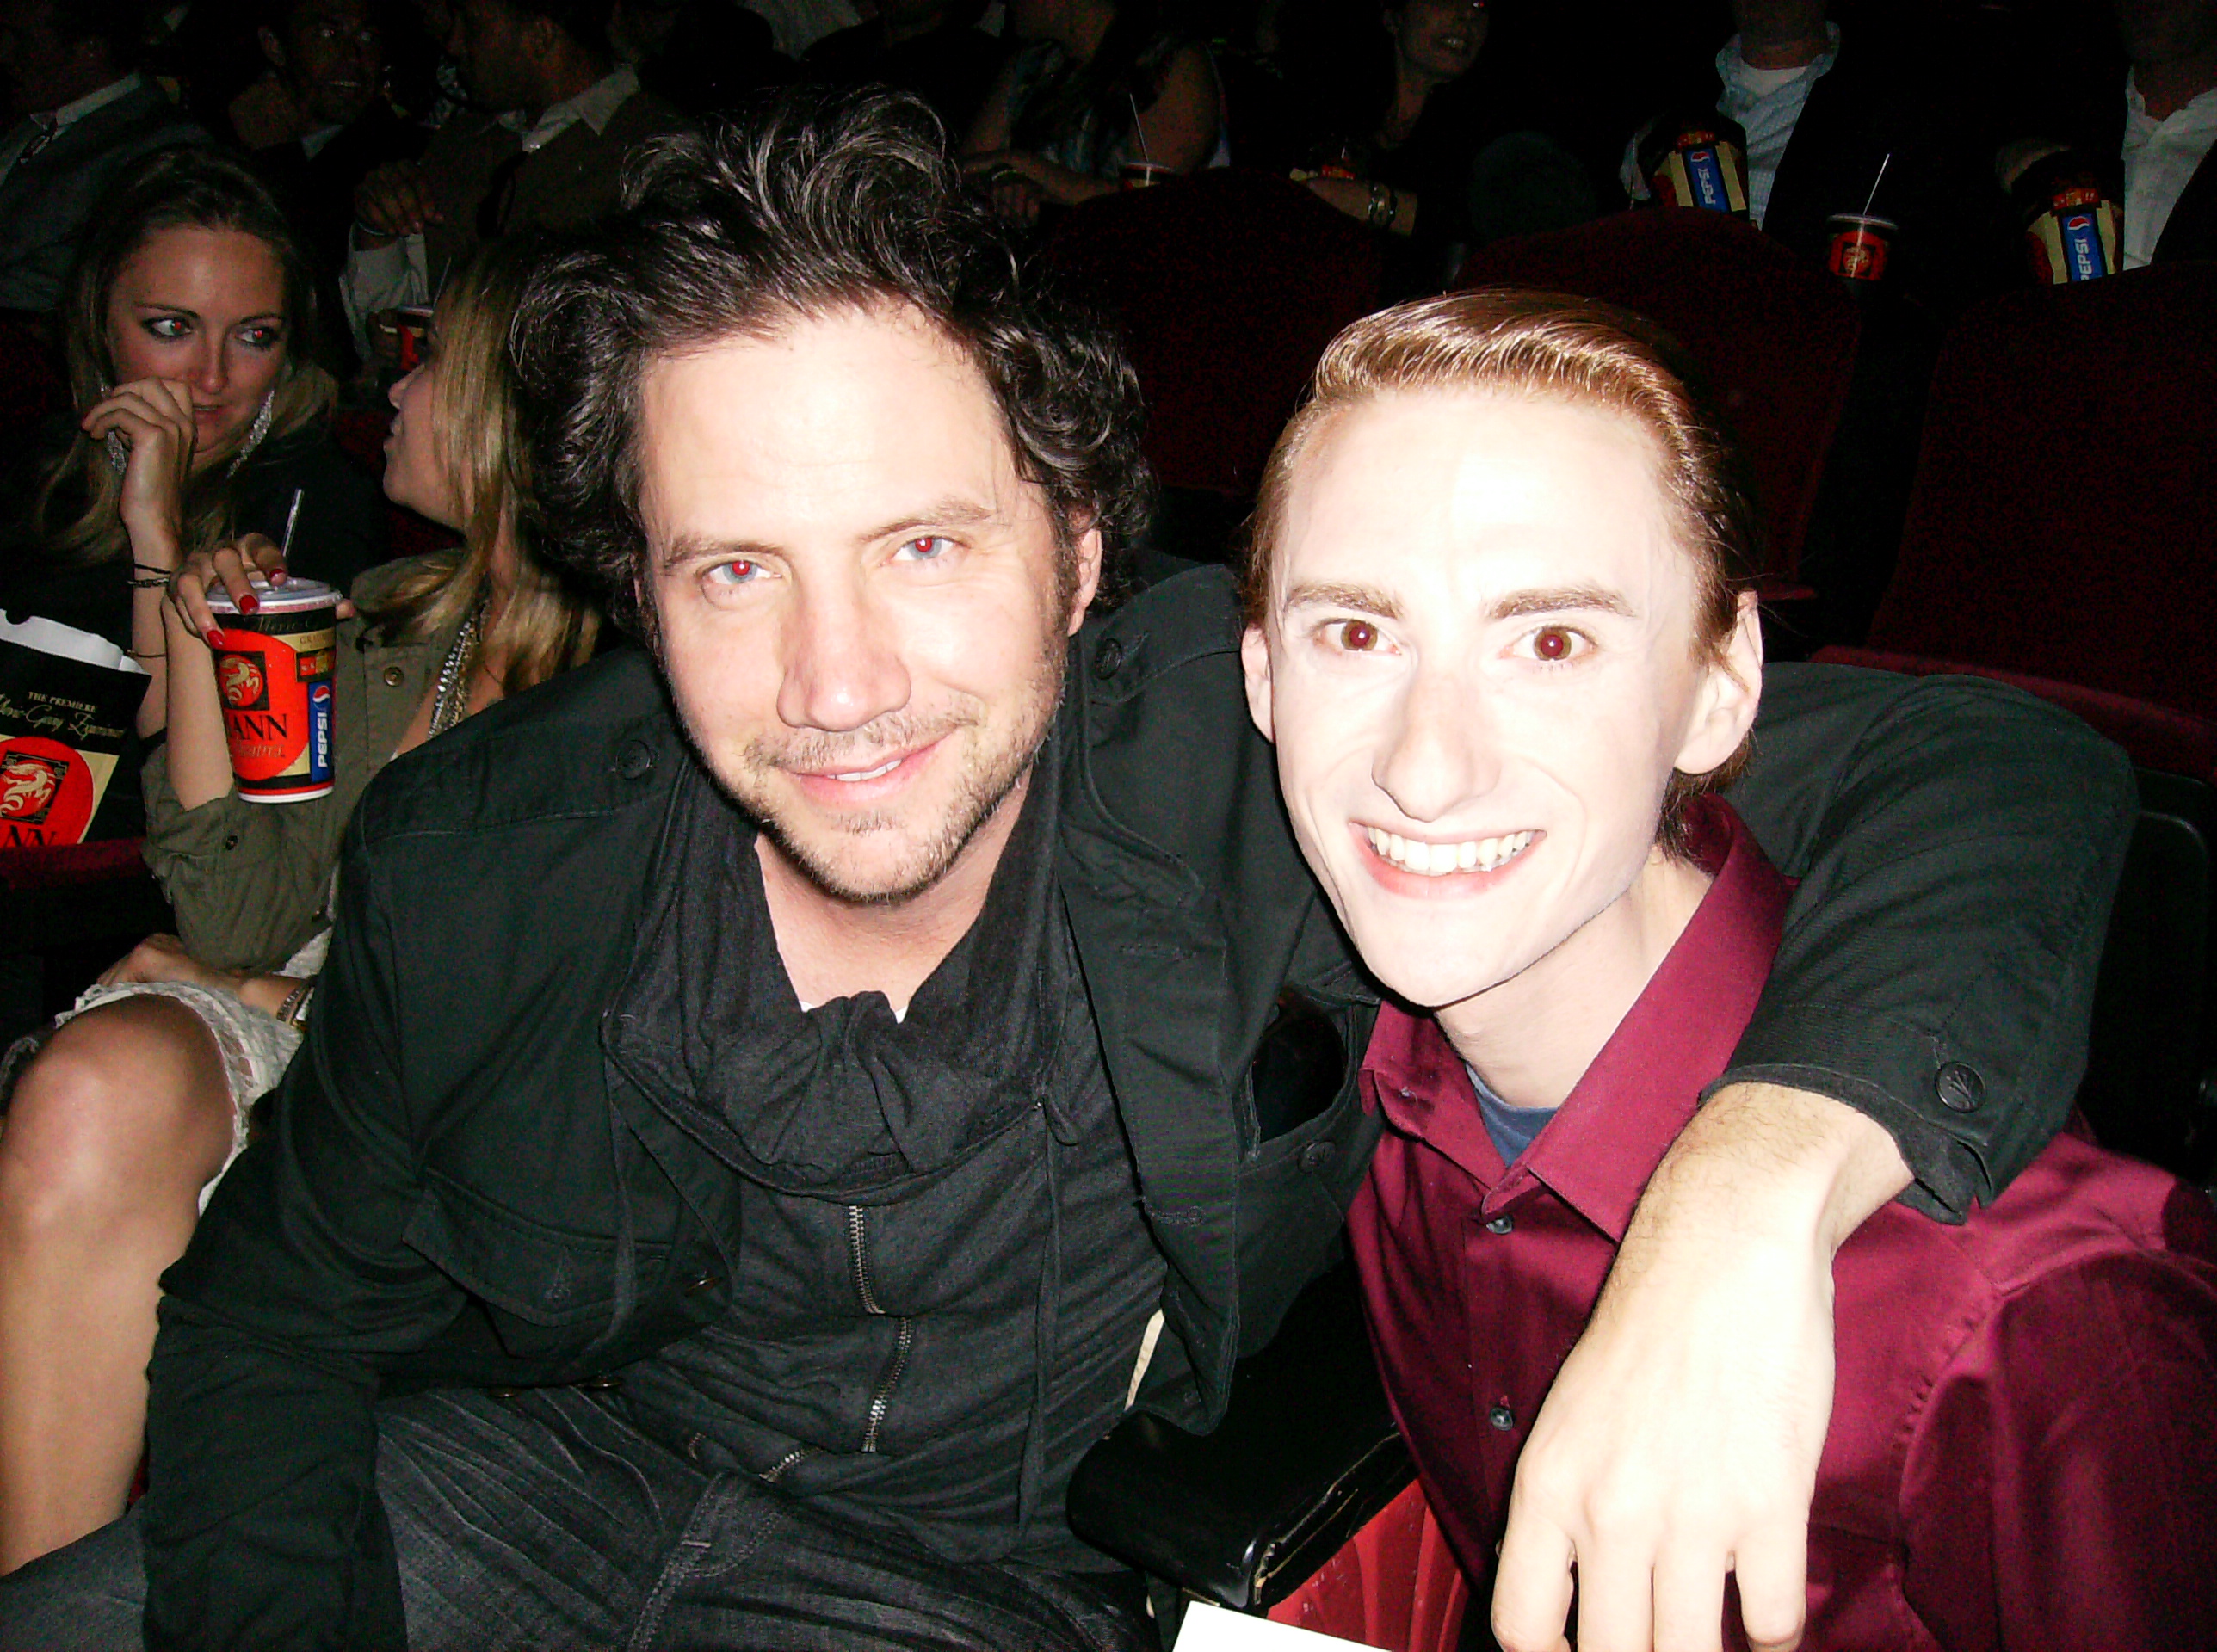 Joshua Patrick Dudley and Jamie Kennedy at the Scream 4 Premiere in 2011